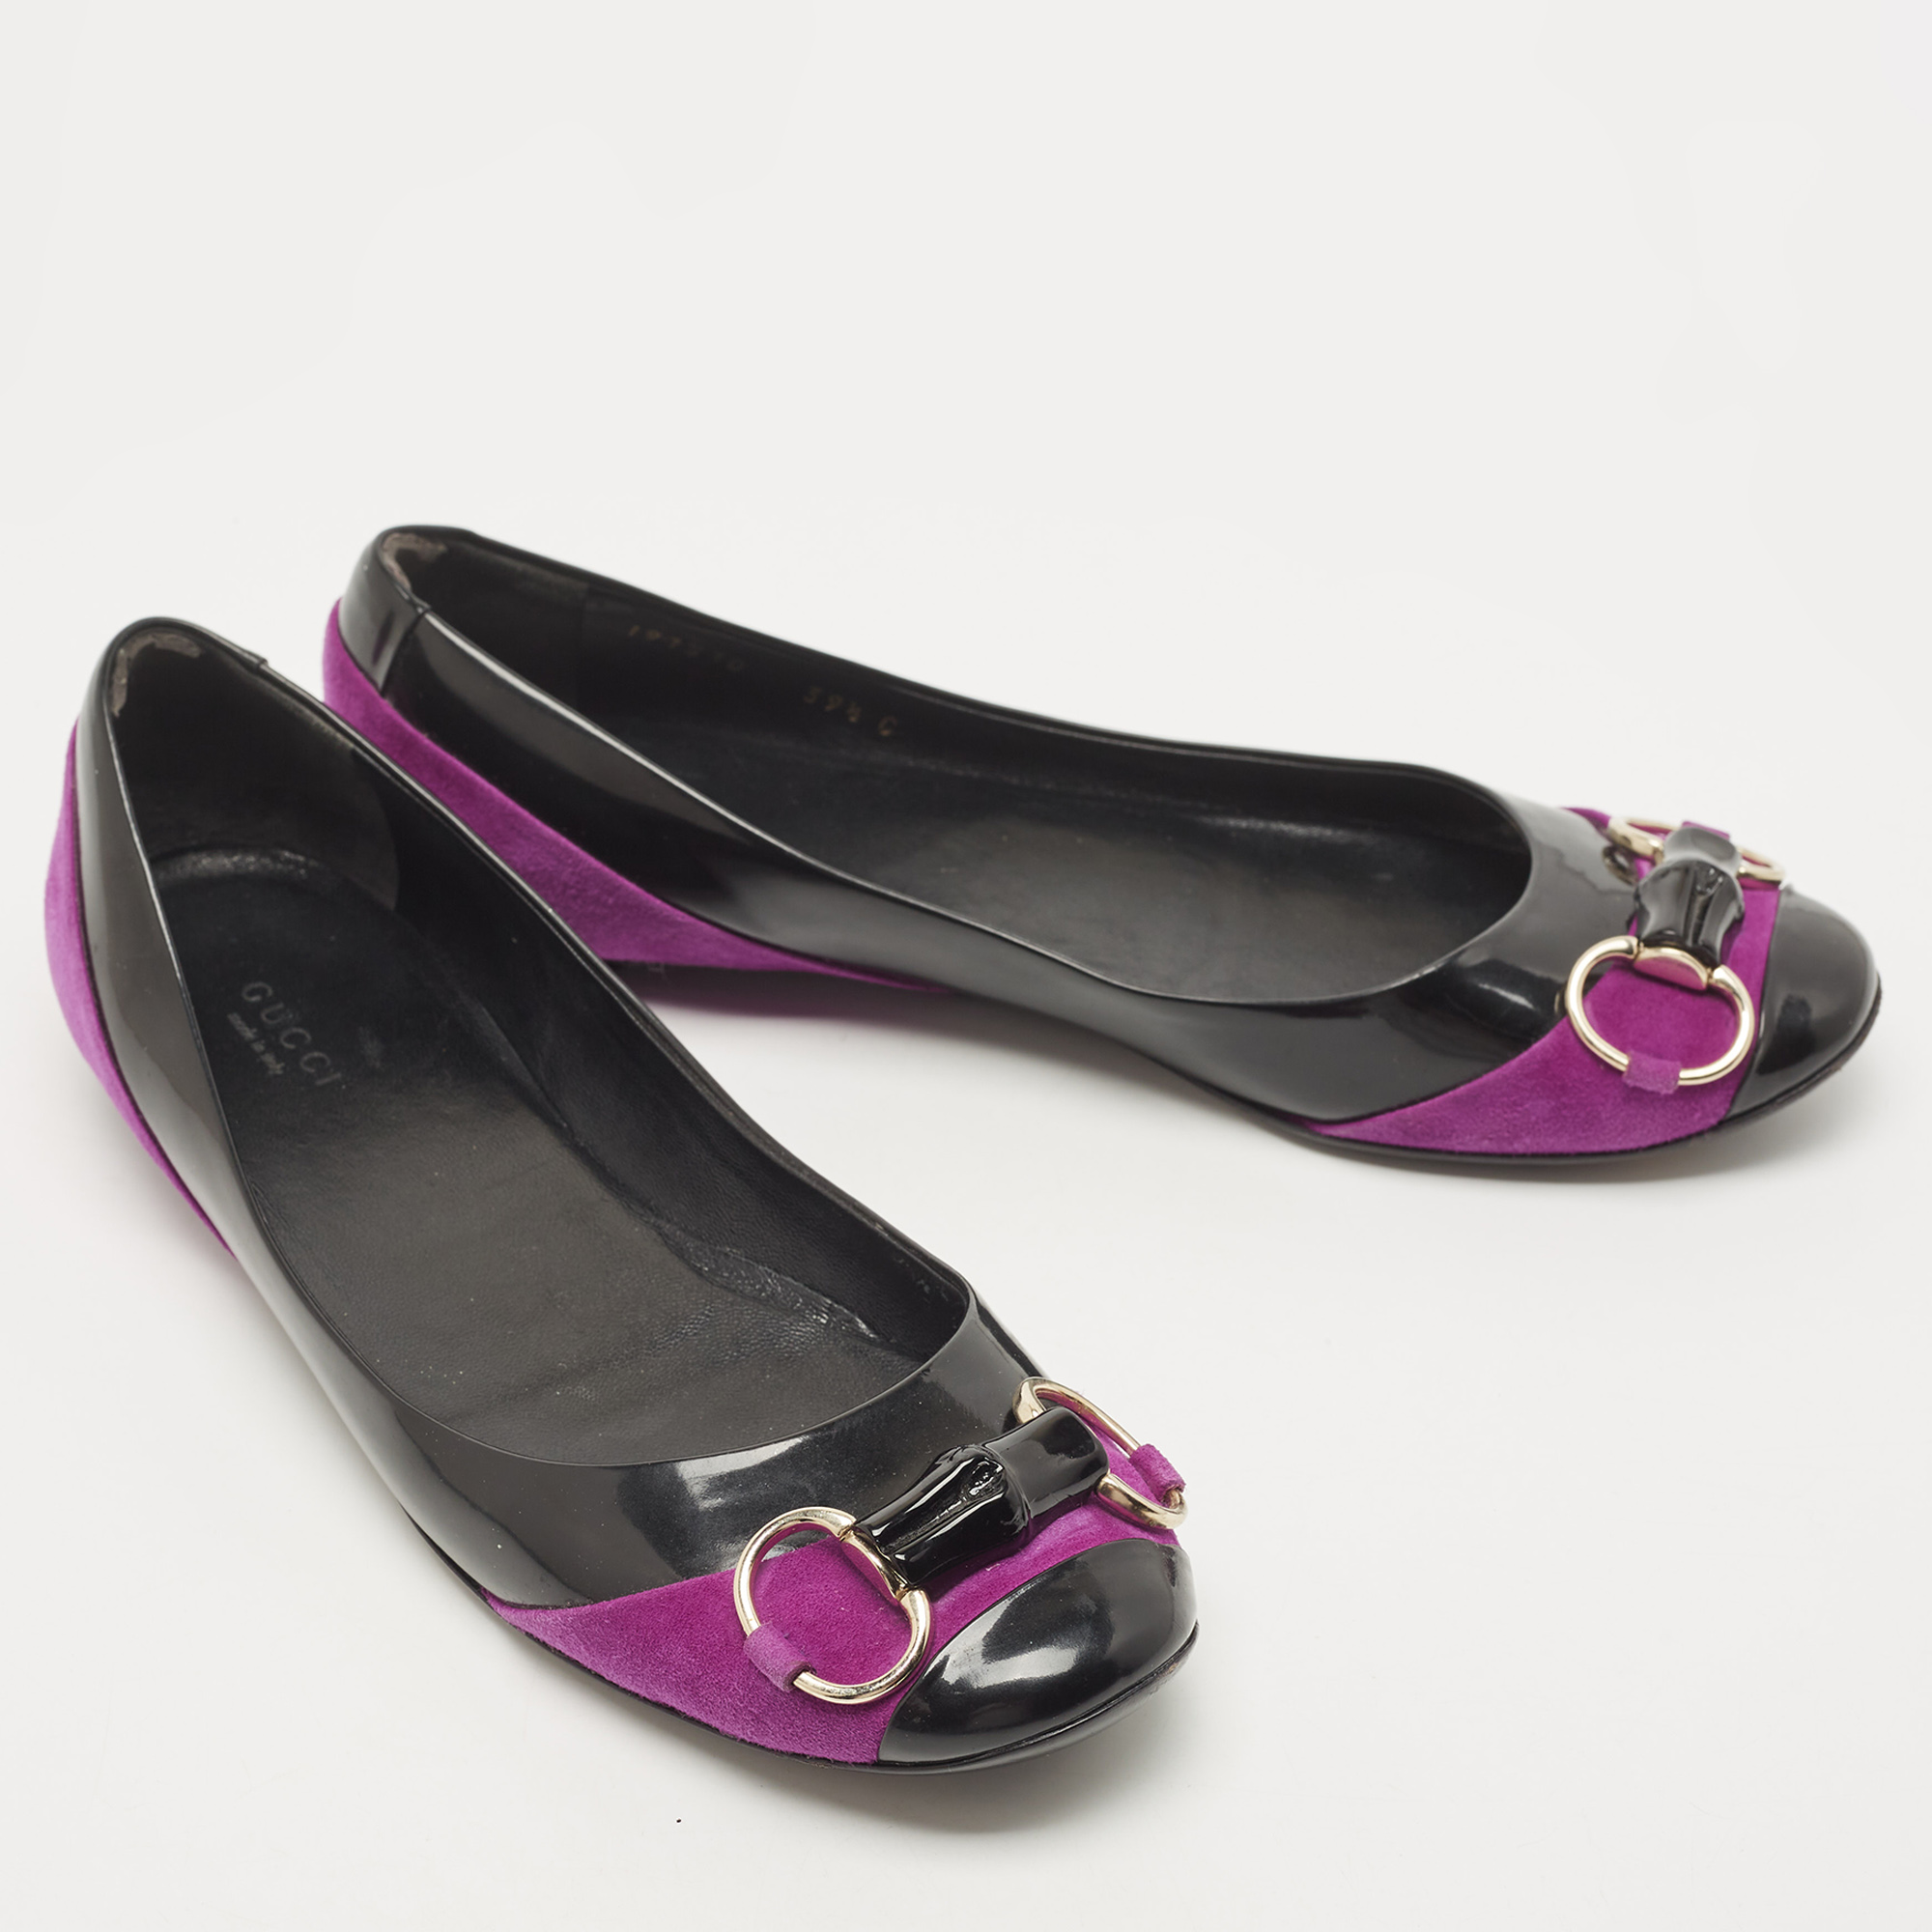 Gucci Purples/Black Patent Leather And Suede Bamboo Horsebit Ballet Flats Size 39.5